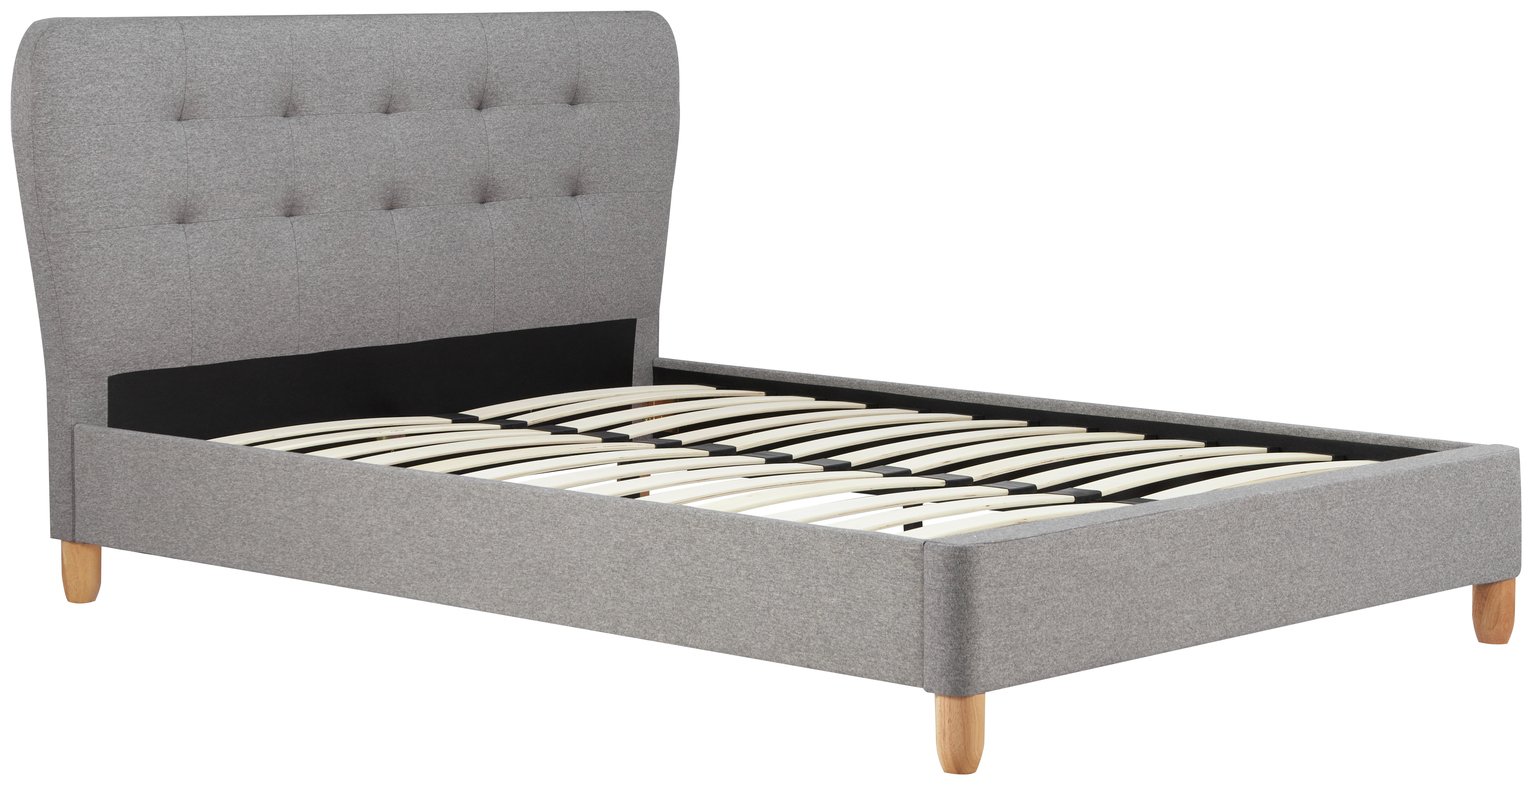 Birlea Stockholm Double Bed Frame Review